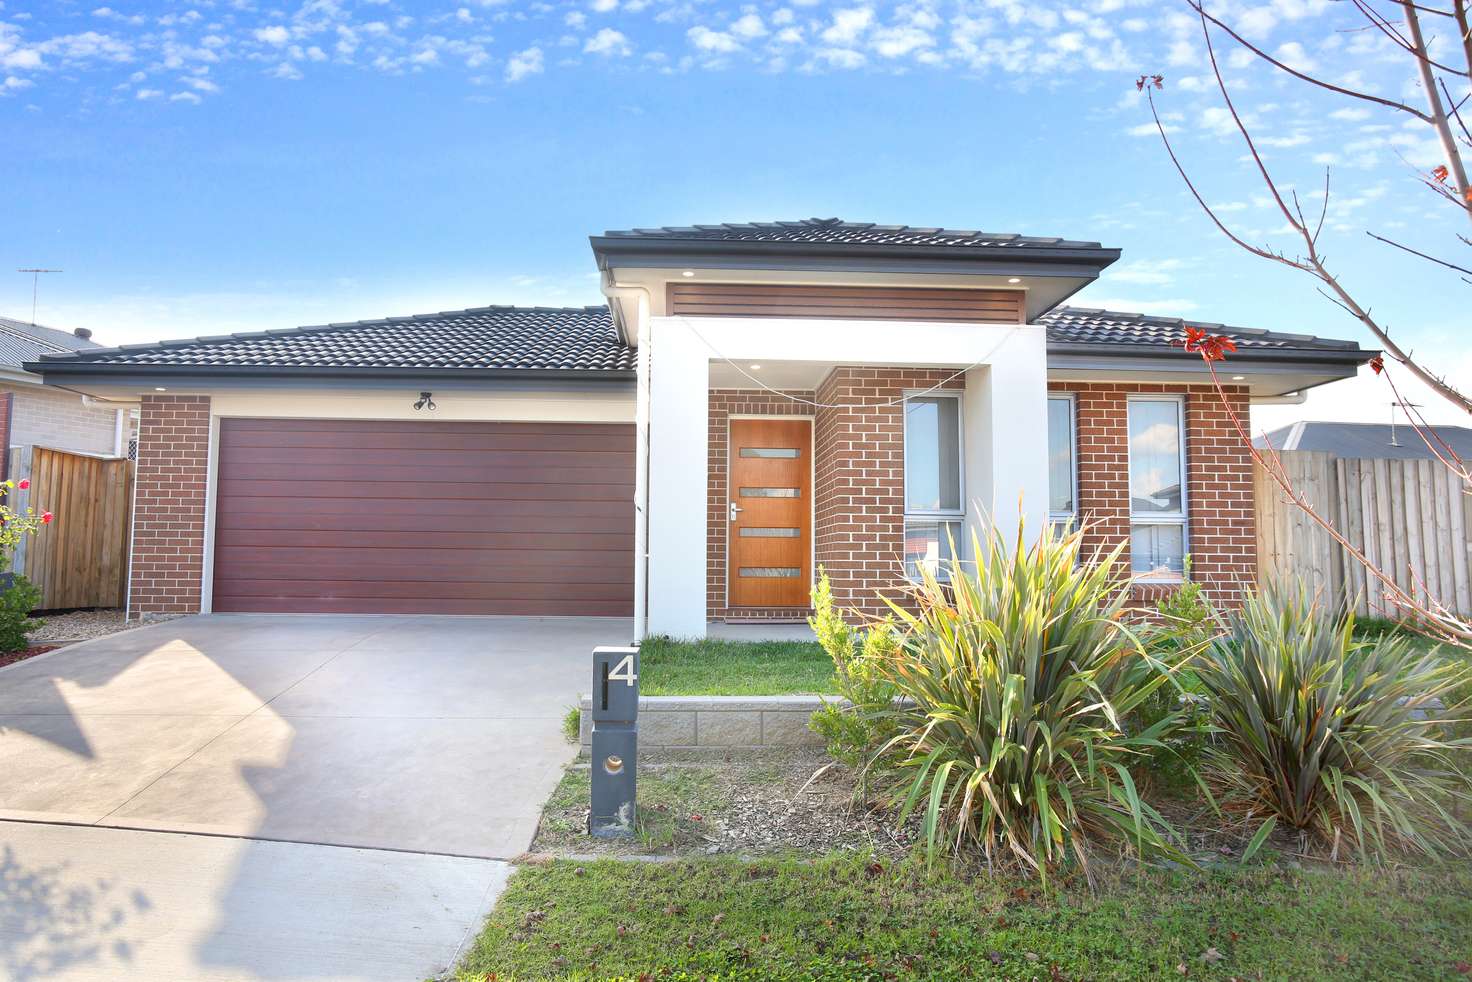 Main view of Homely house listing, 4 Milky Way, Campbelltown NSW 2560